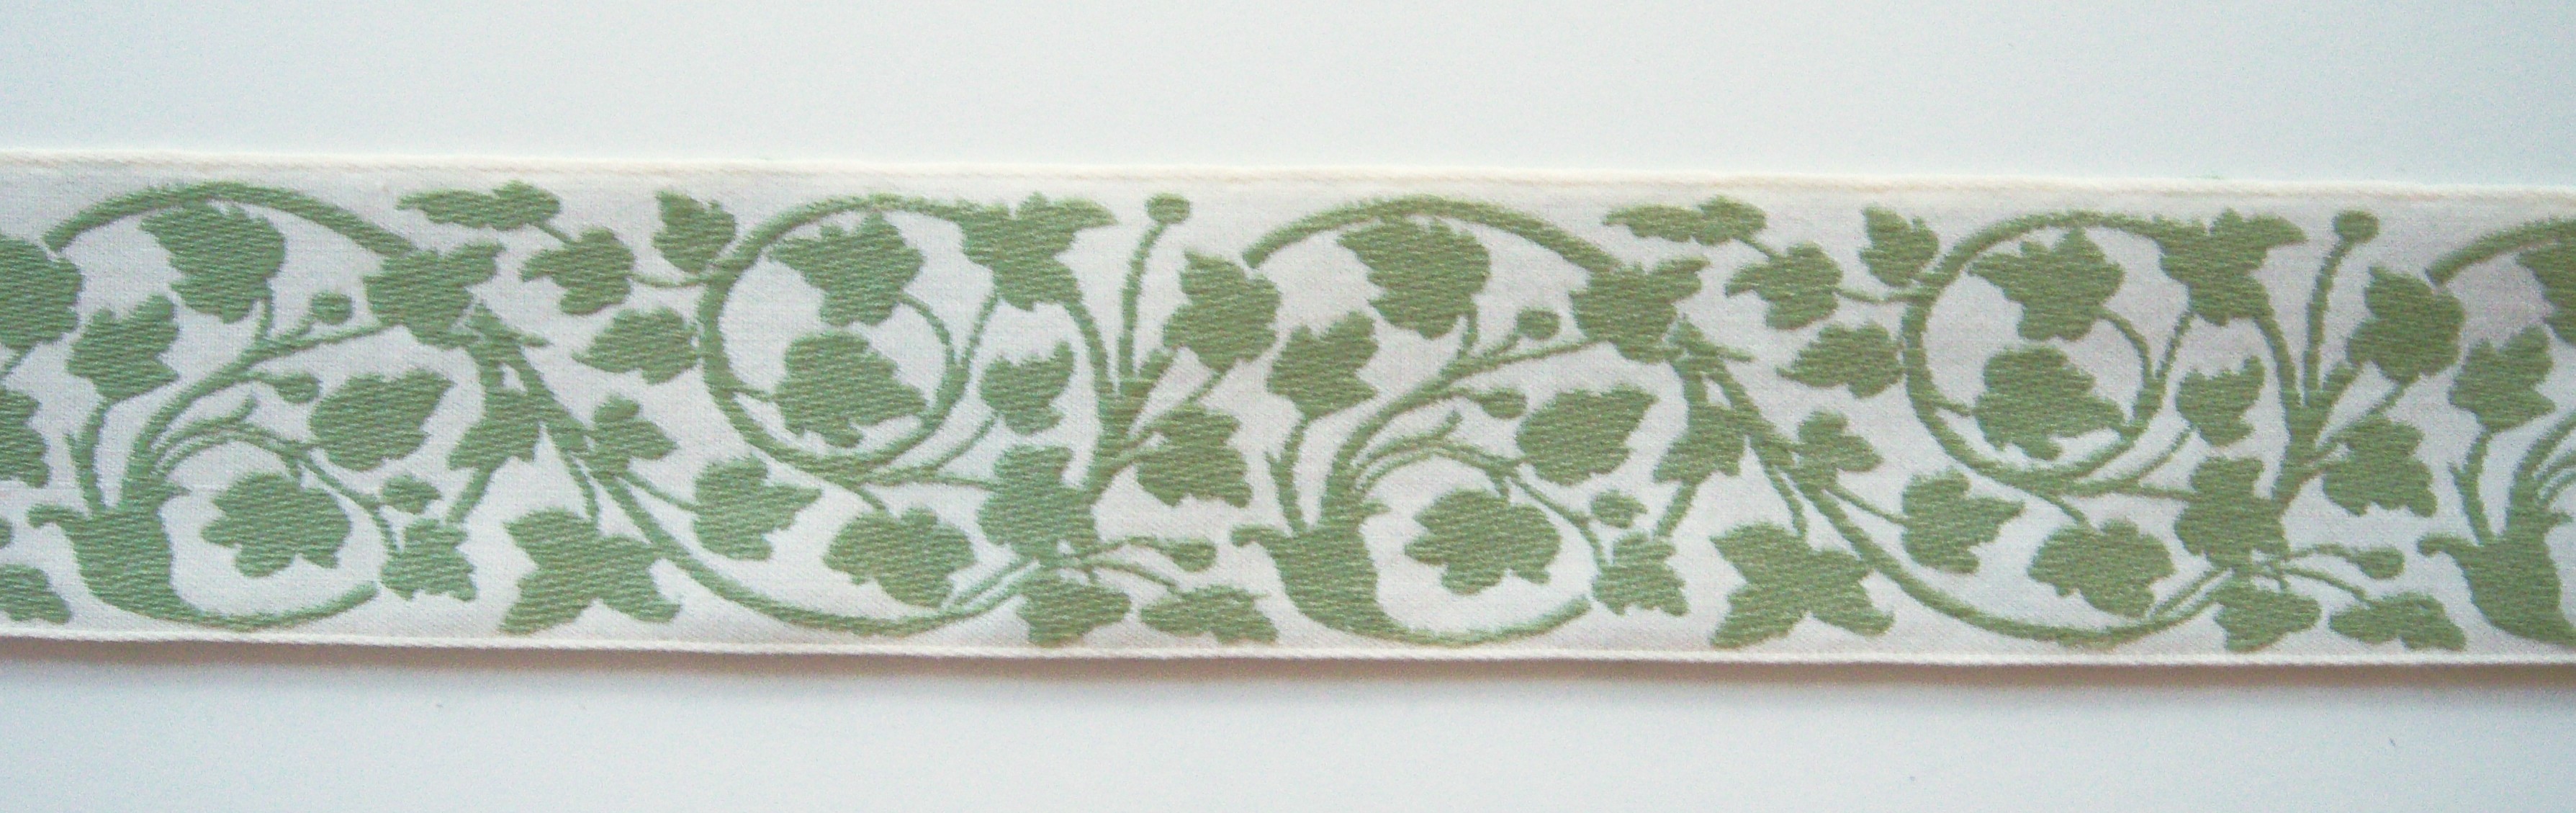 Conso Ivory/Willow 2 3/16" Jacquard